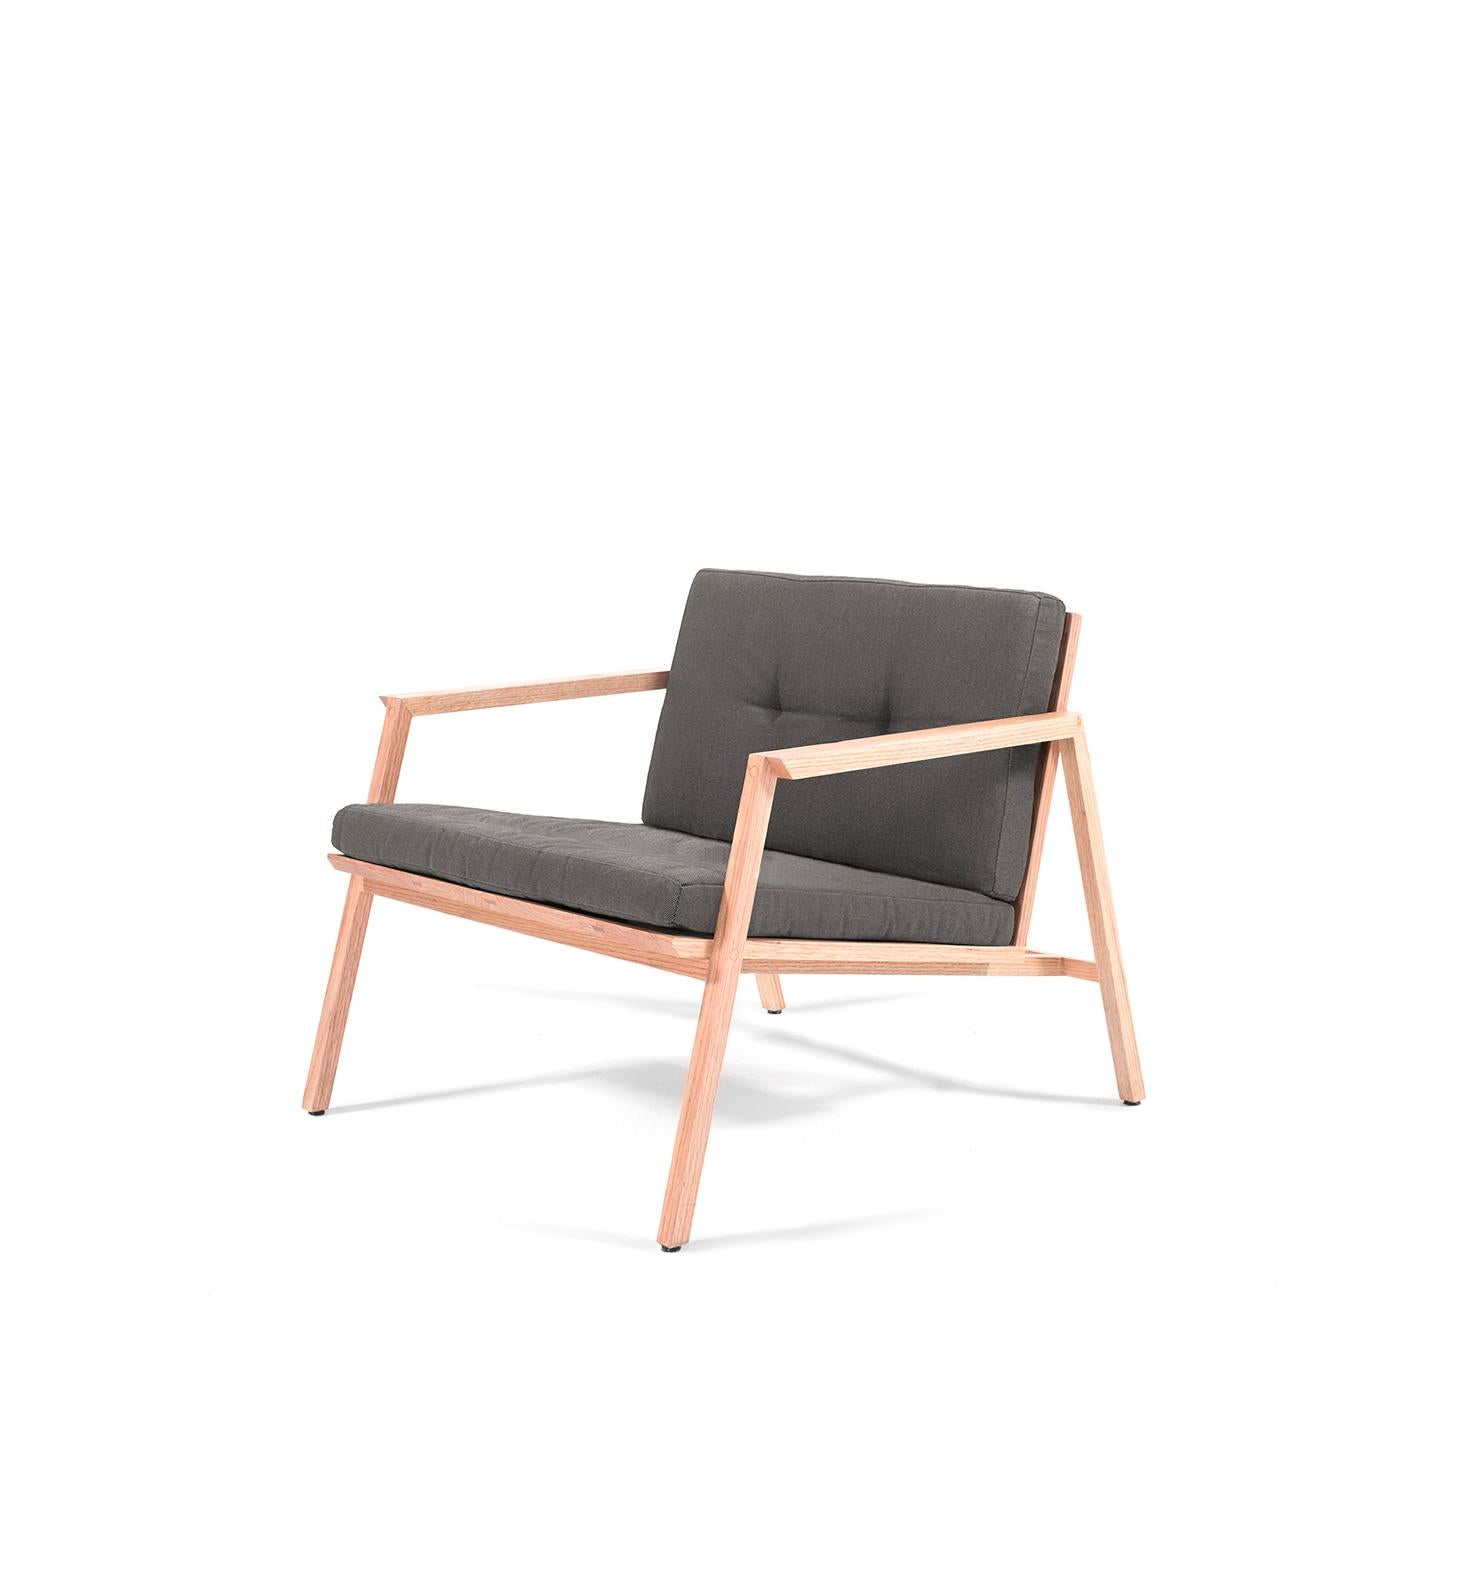 Tumbona Dedo, Mexican Contemporary Lounge Chair by Emiliano Molina for CUCHARA For Sale 3